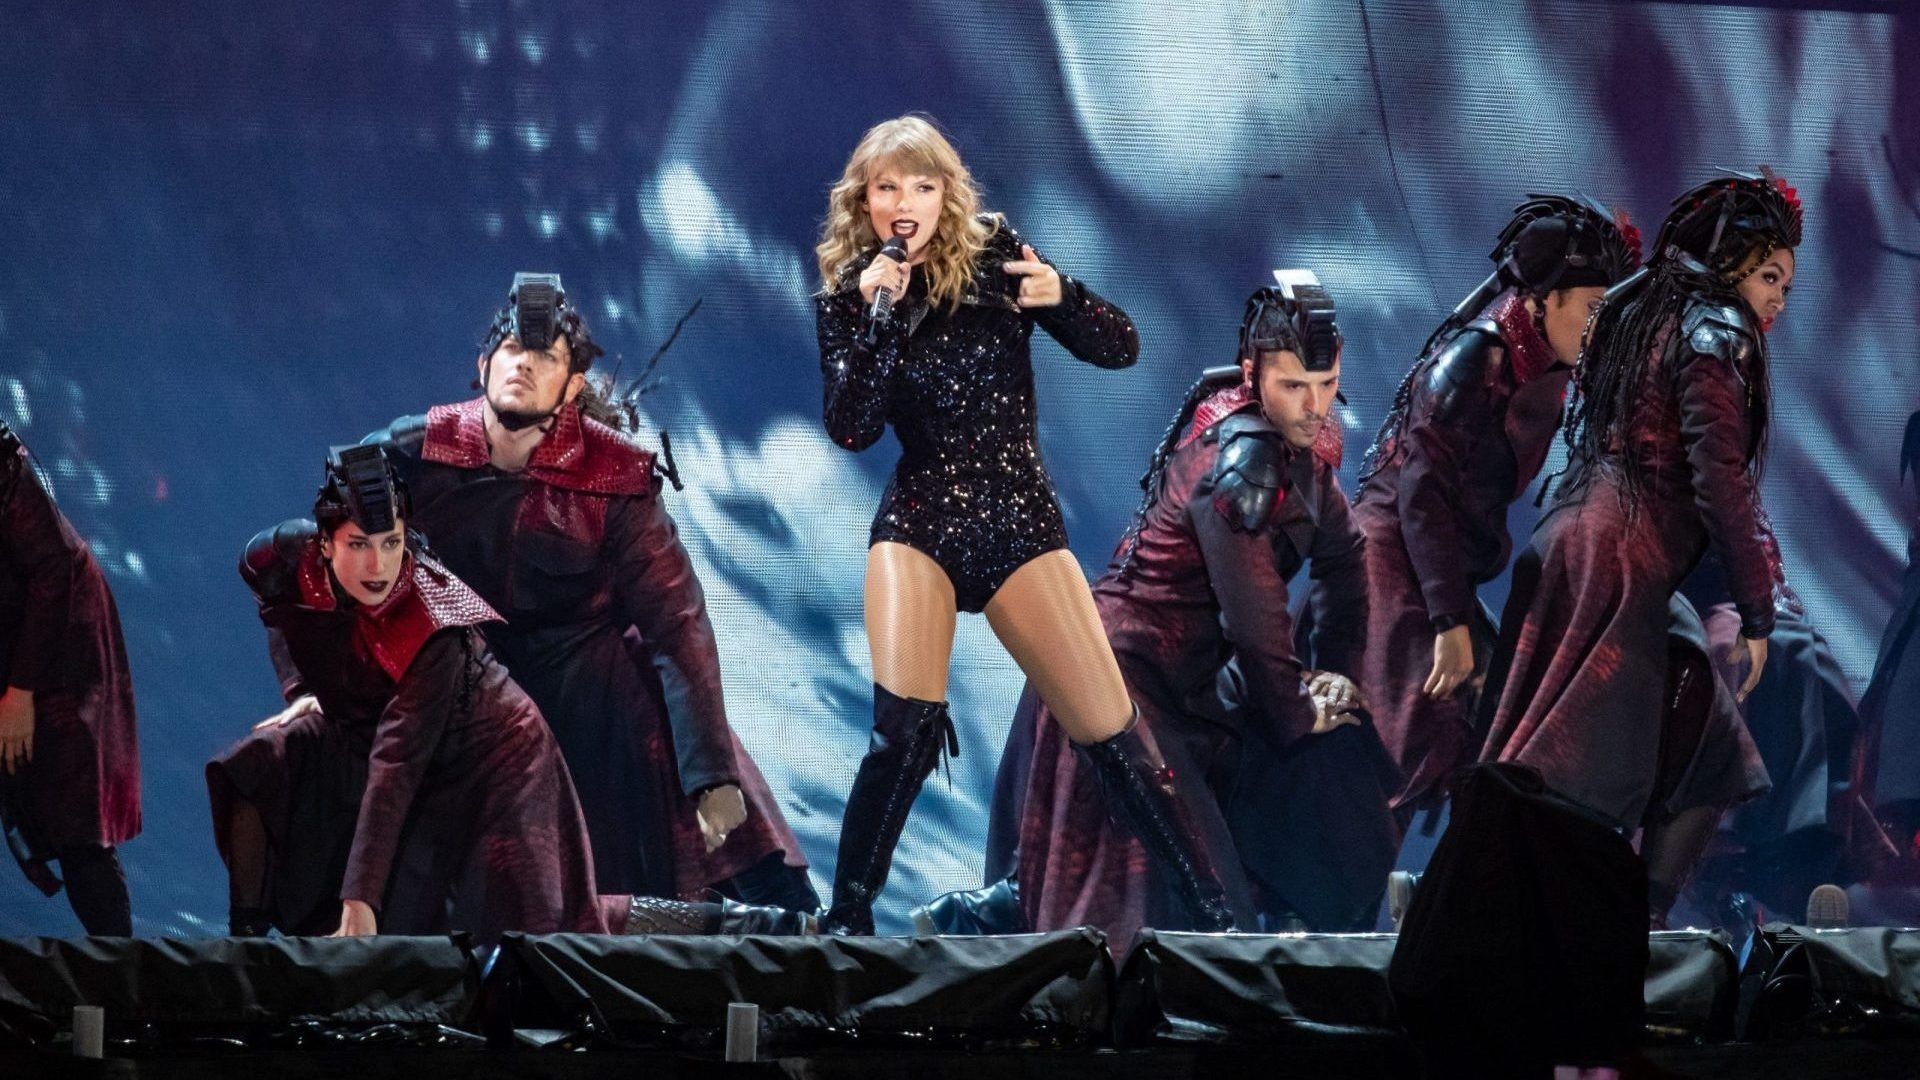 Ticketmaster Cancels Sale Of Taylor Swift 'The Eras Tour' Concert Tickets